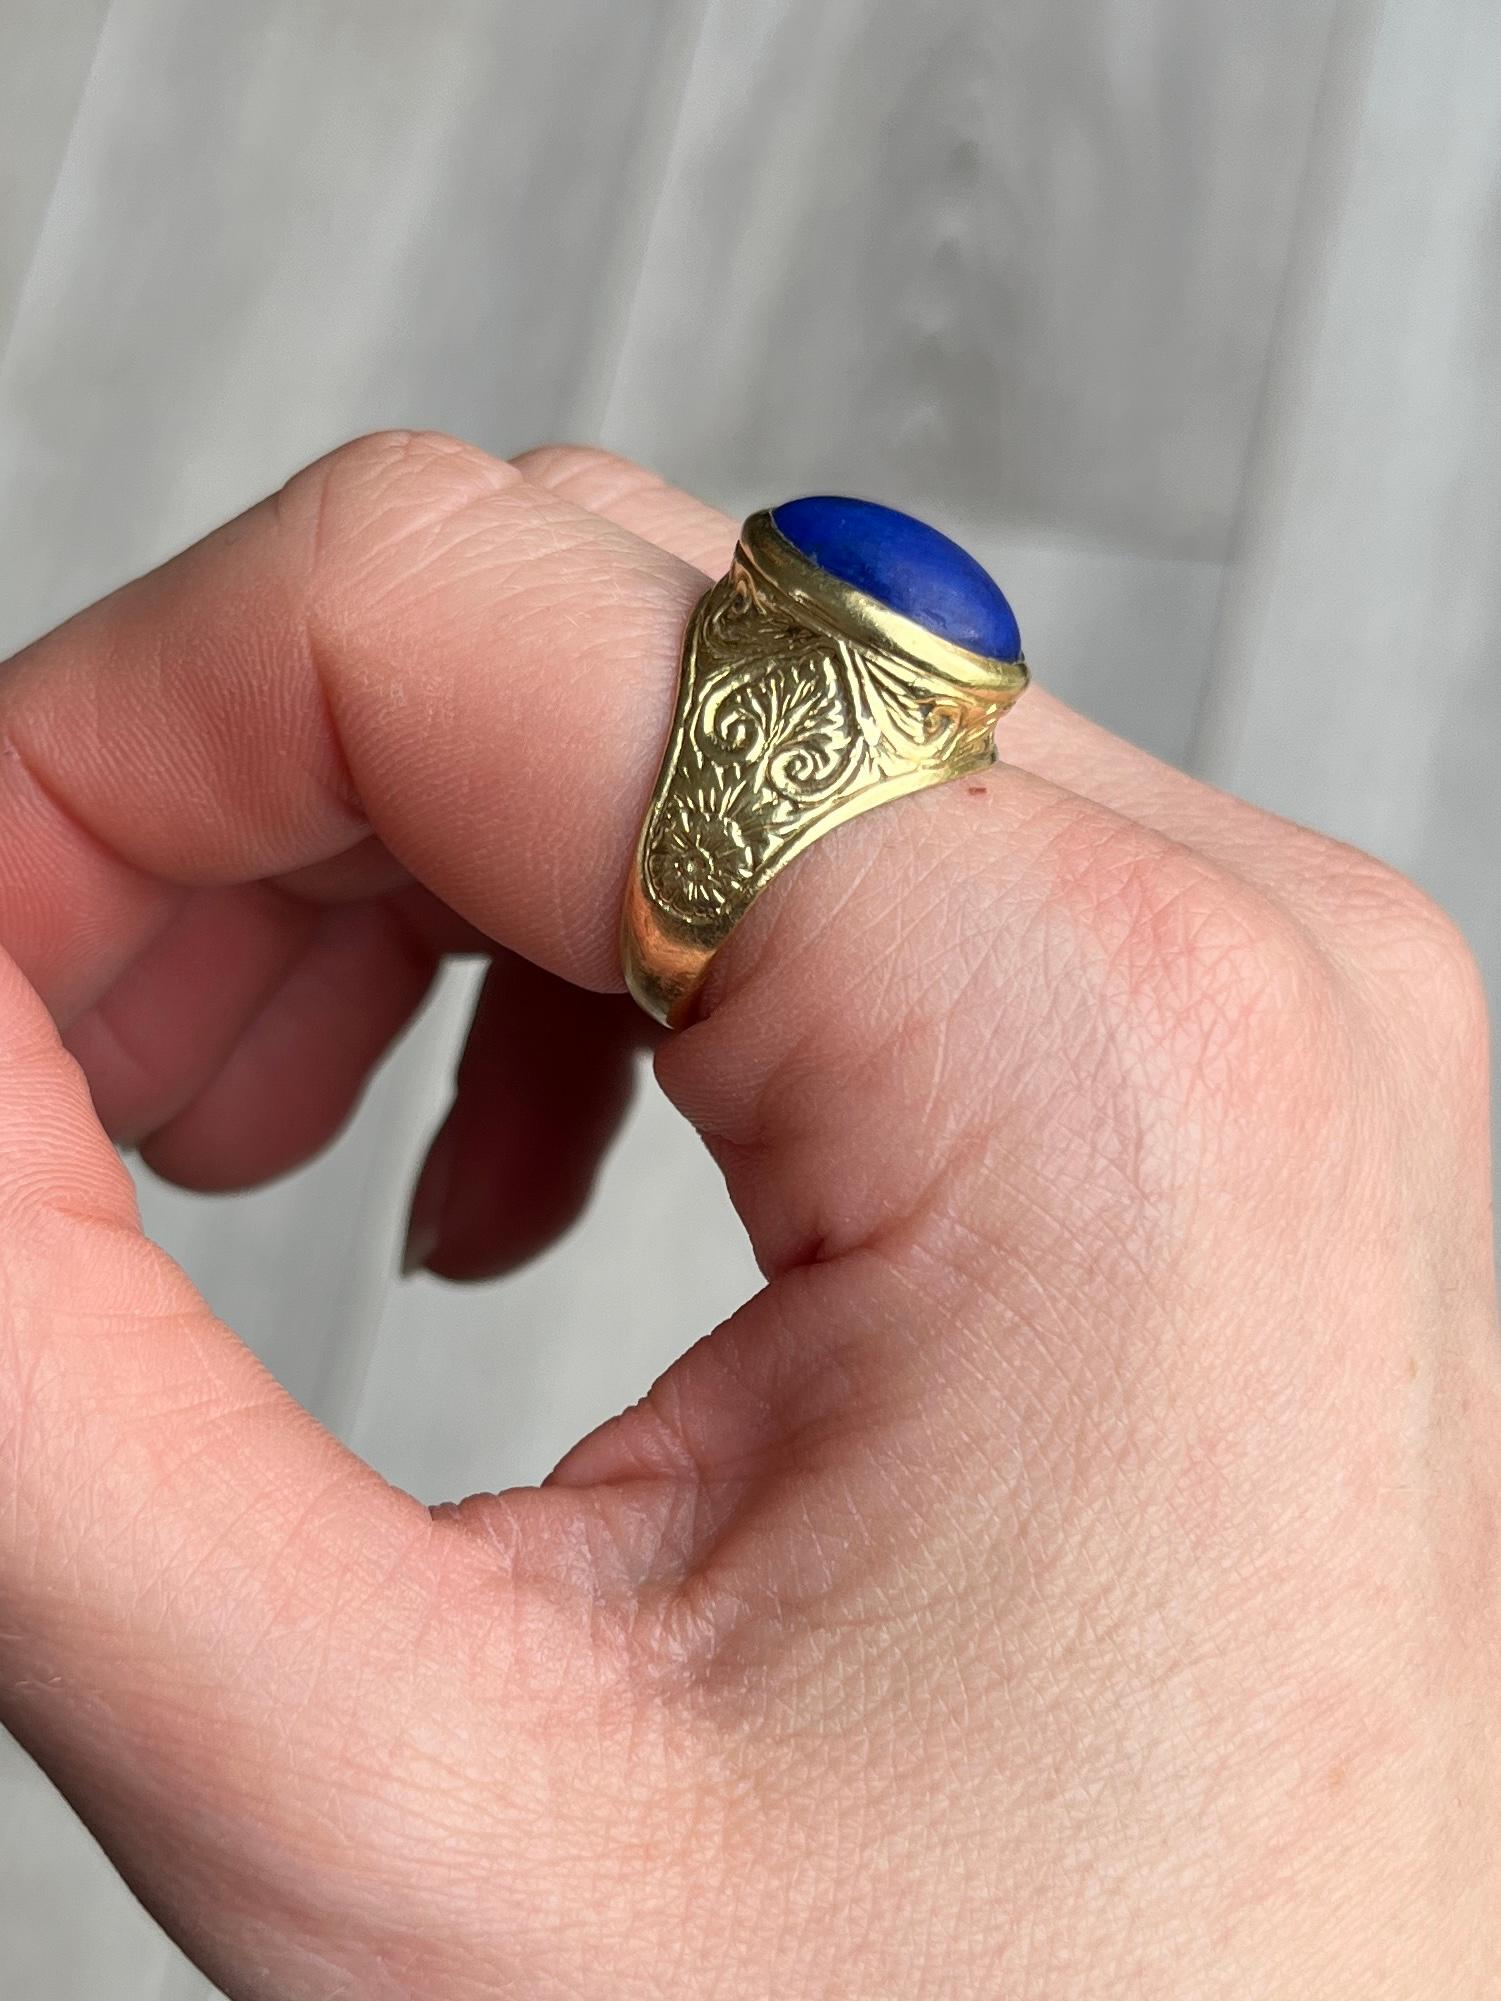 The lapis stone in this ring is beautiful and bright. The smooth cut of the stone goes perfectly with the chunky and decorative gold ring. Modelled in 18 carat gold. 

Ring Size: N 1/2 or 7
Stone Dimensions: 14x10mm

Weight: 7.1g